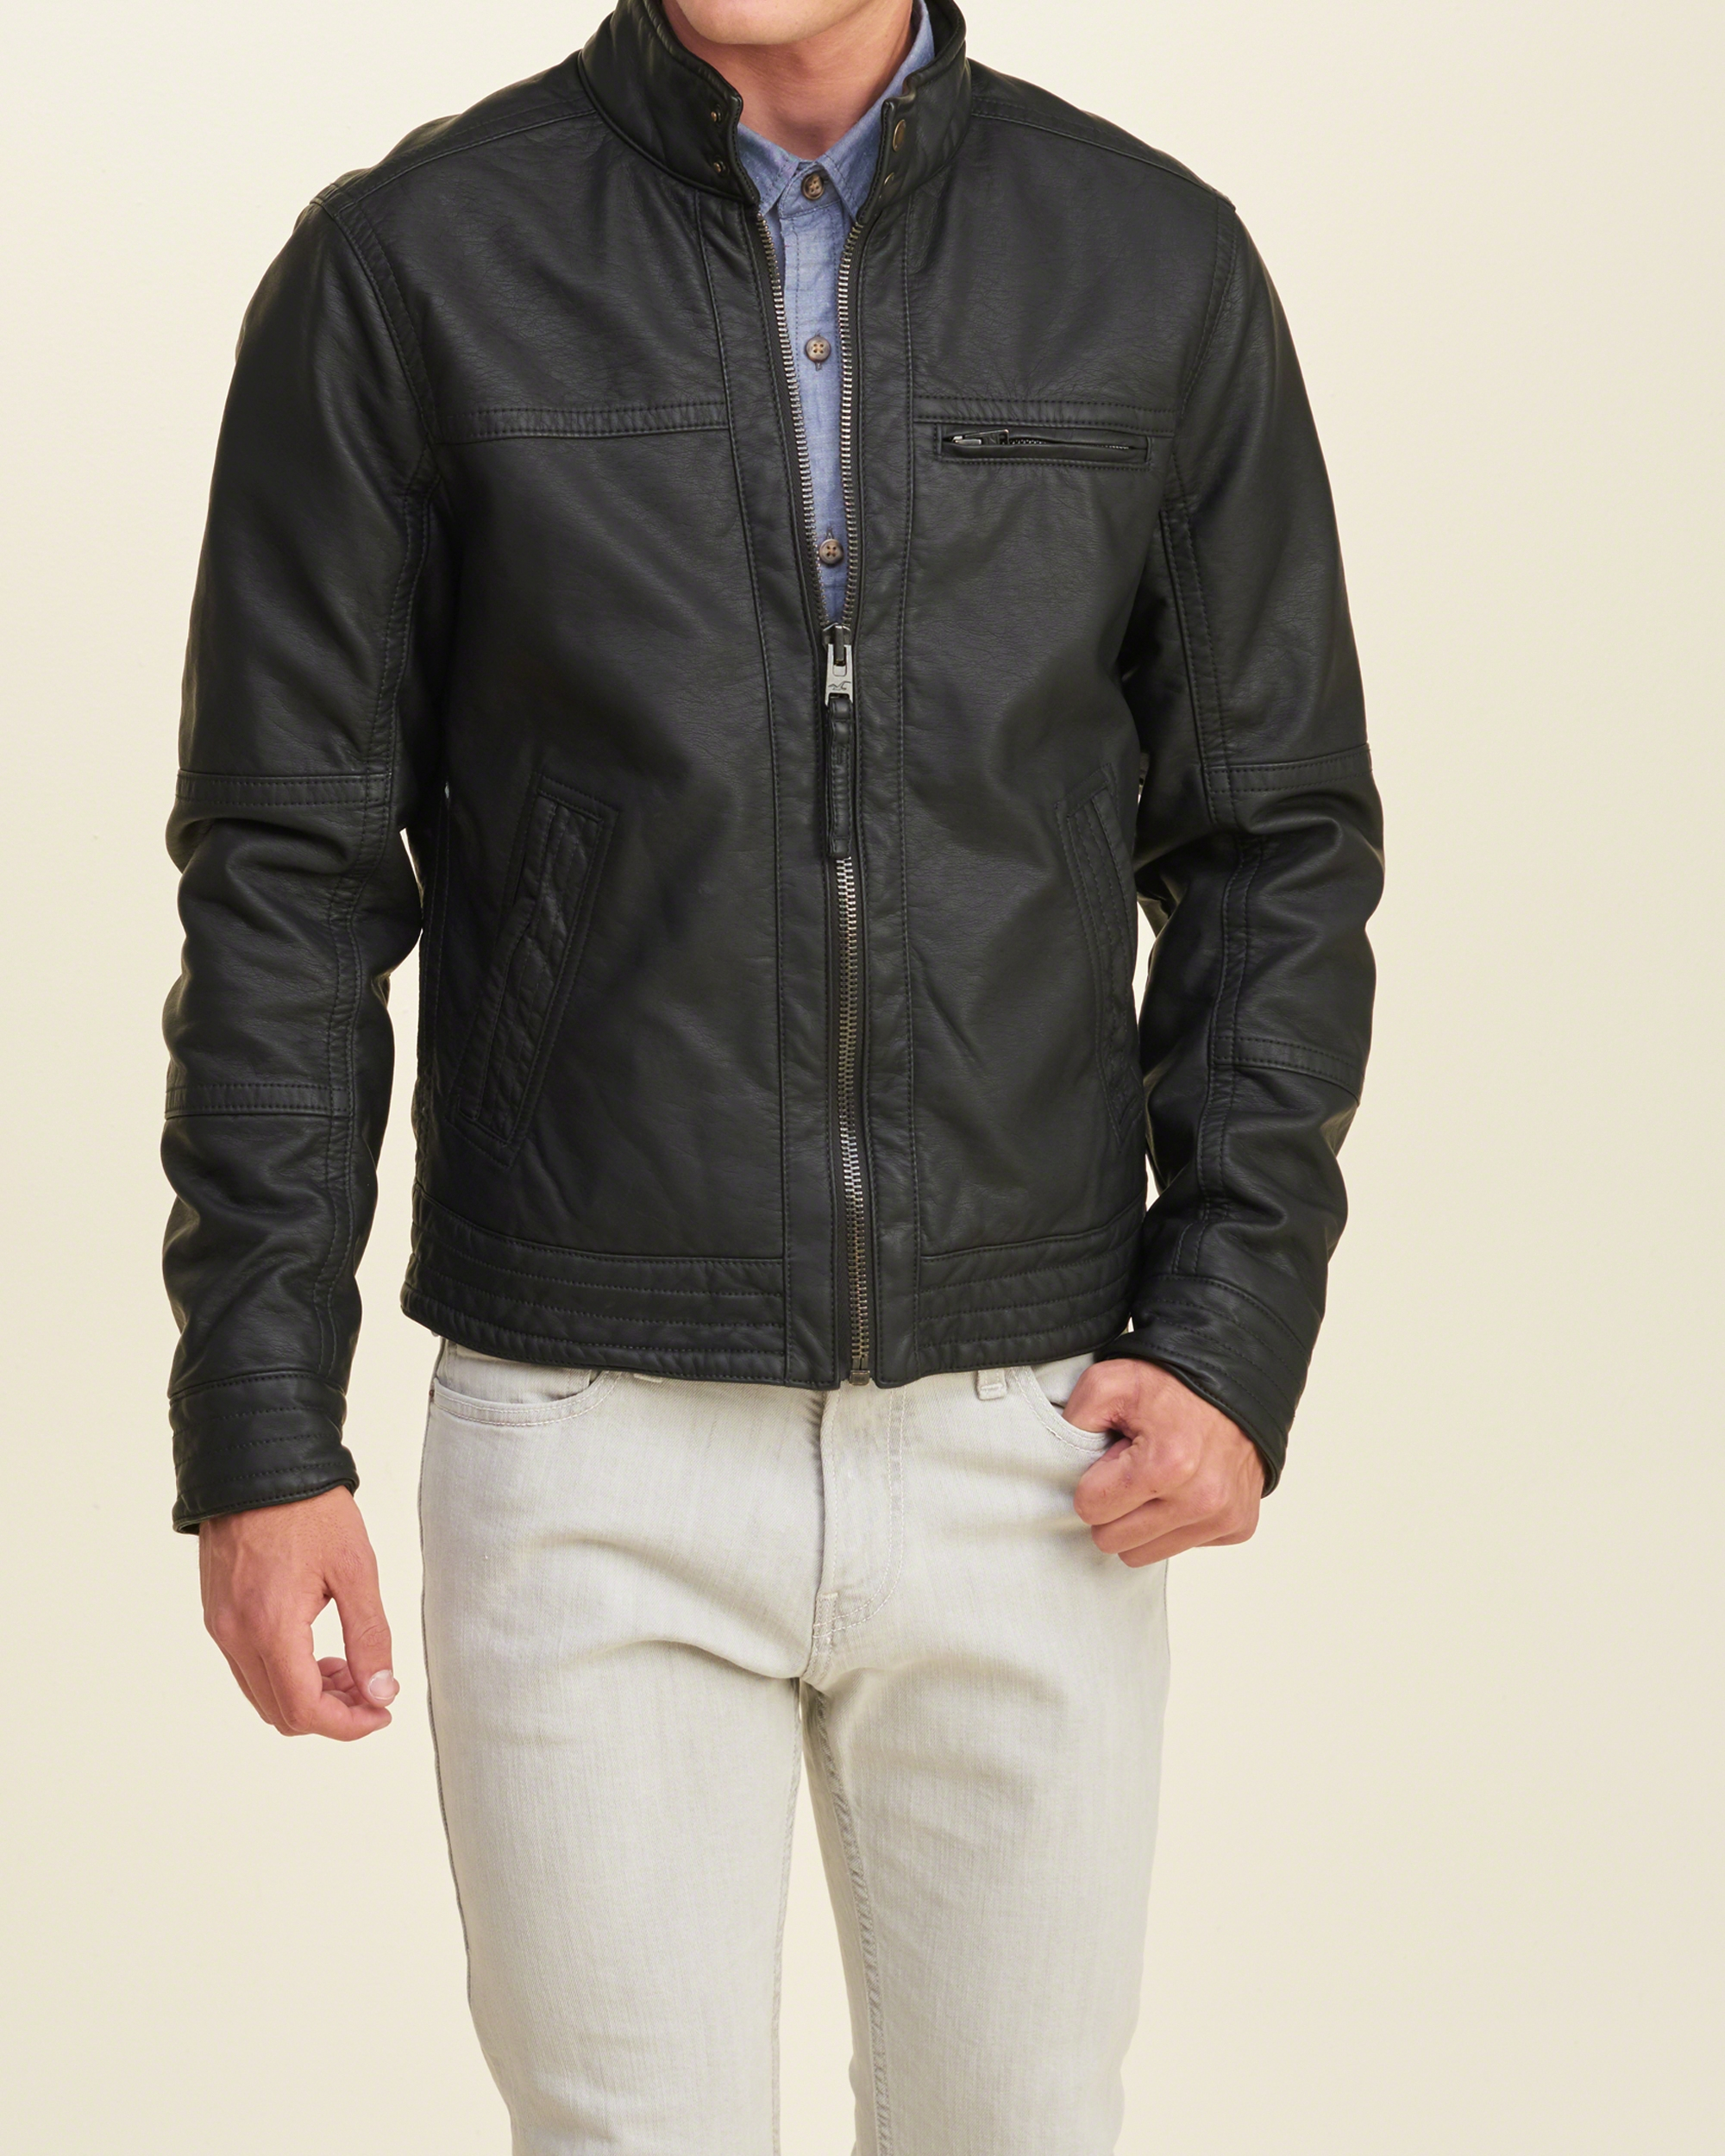 Hollister Synthetic Faux Leather Moto Jacket in Black for Men - Lyst